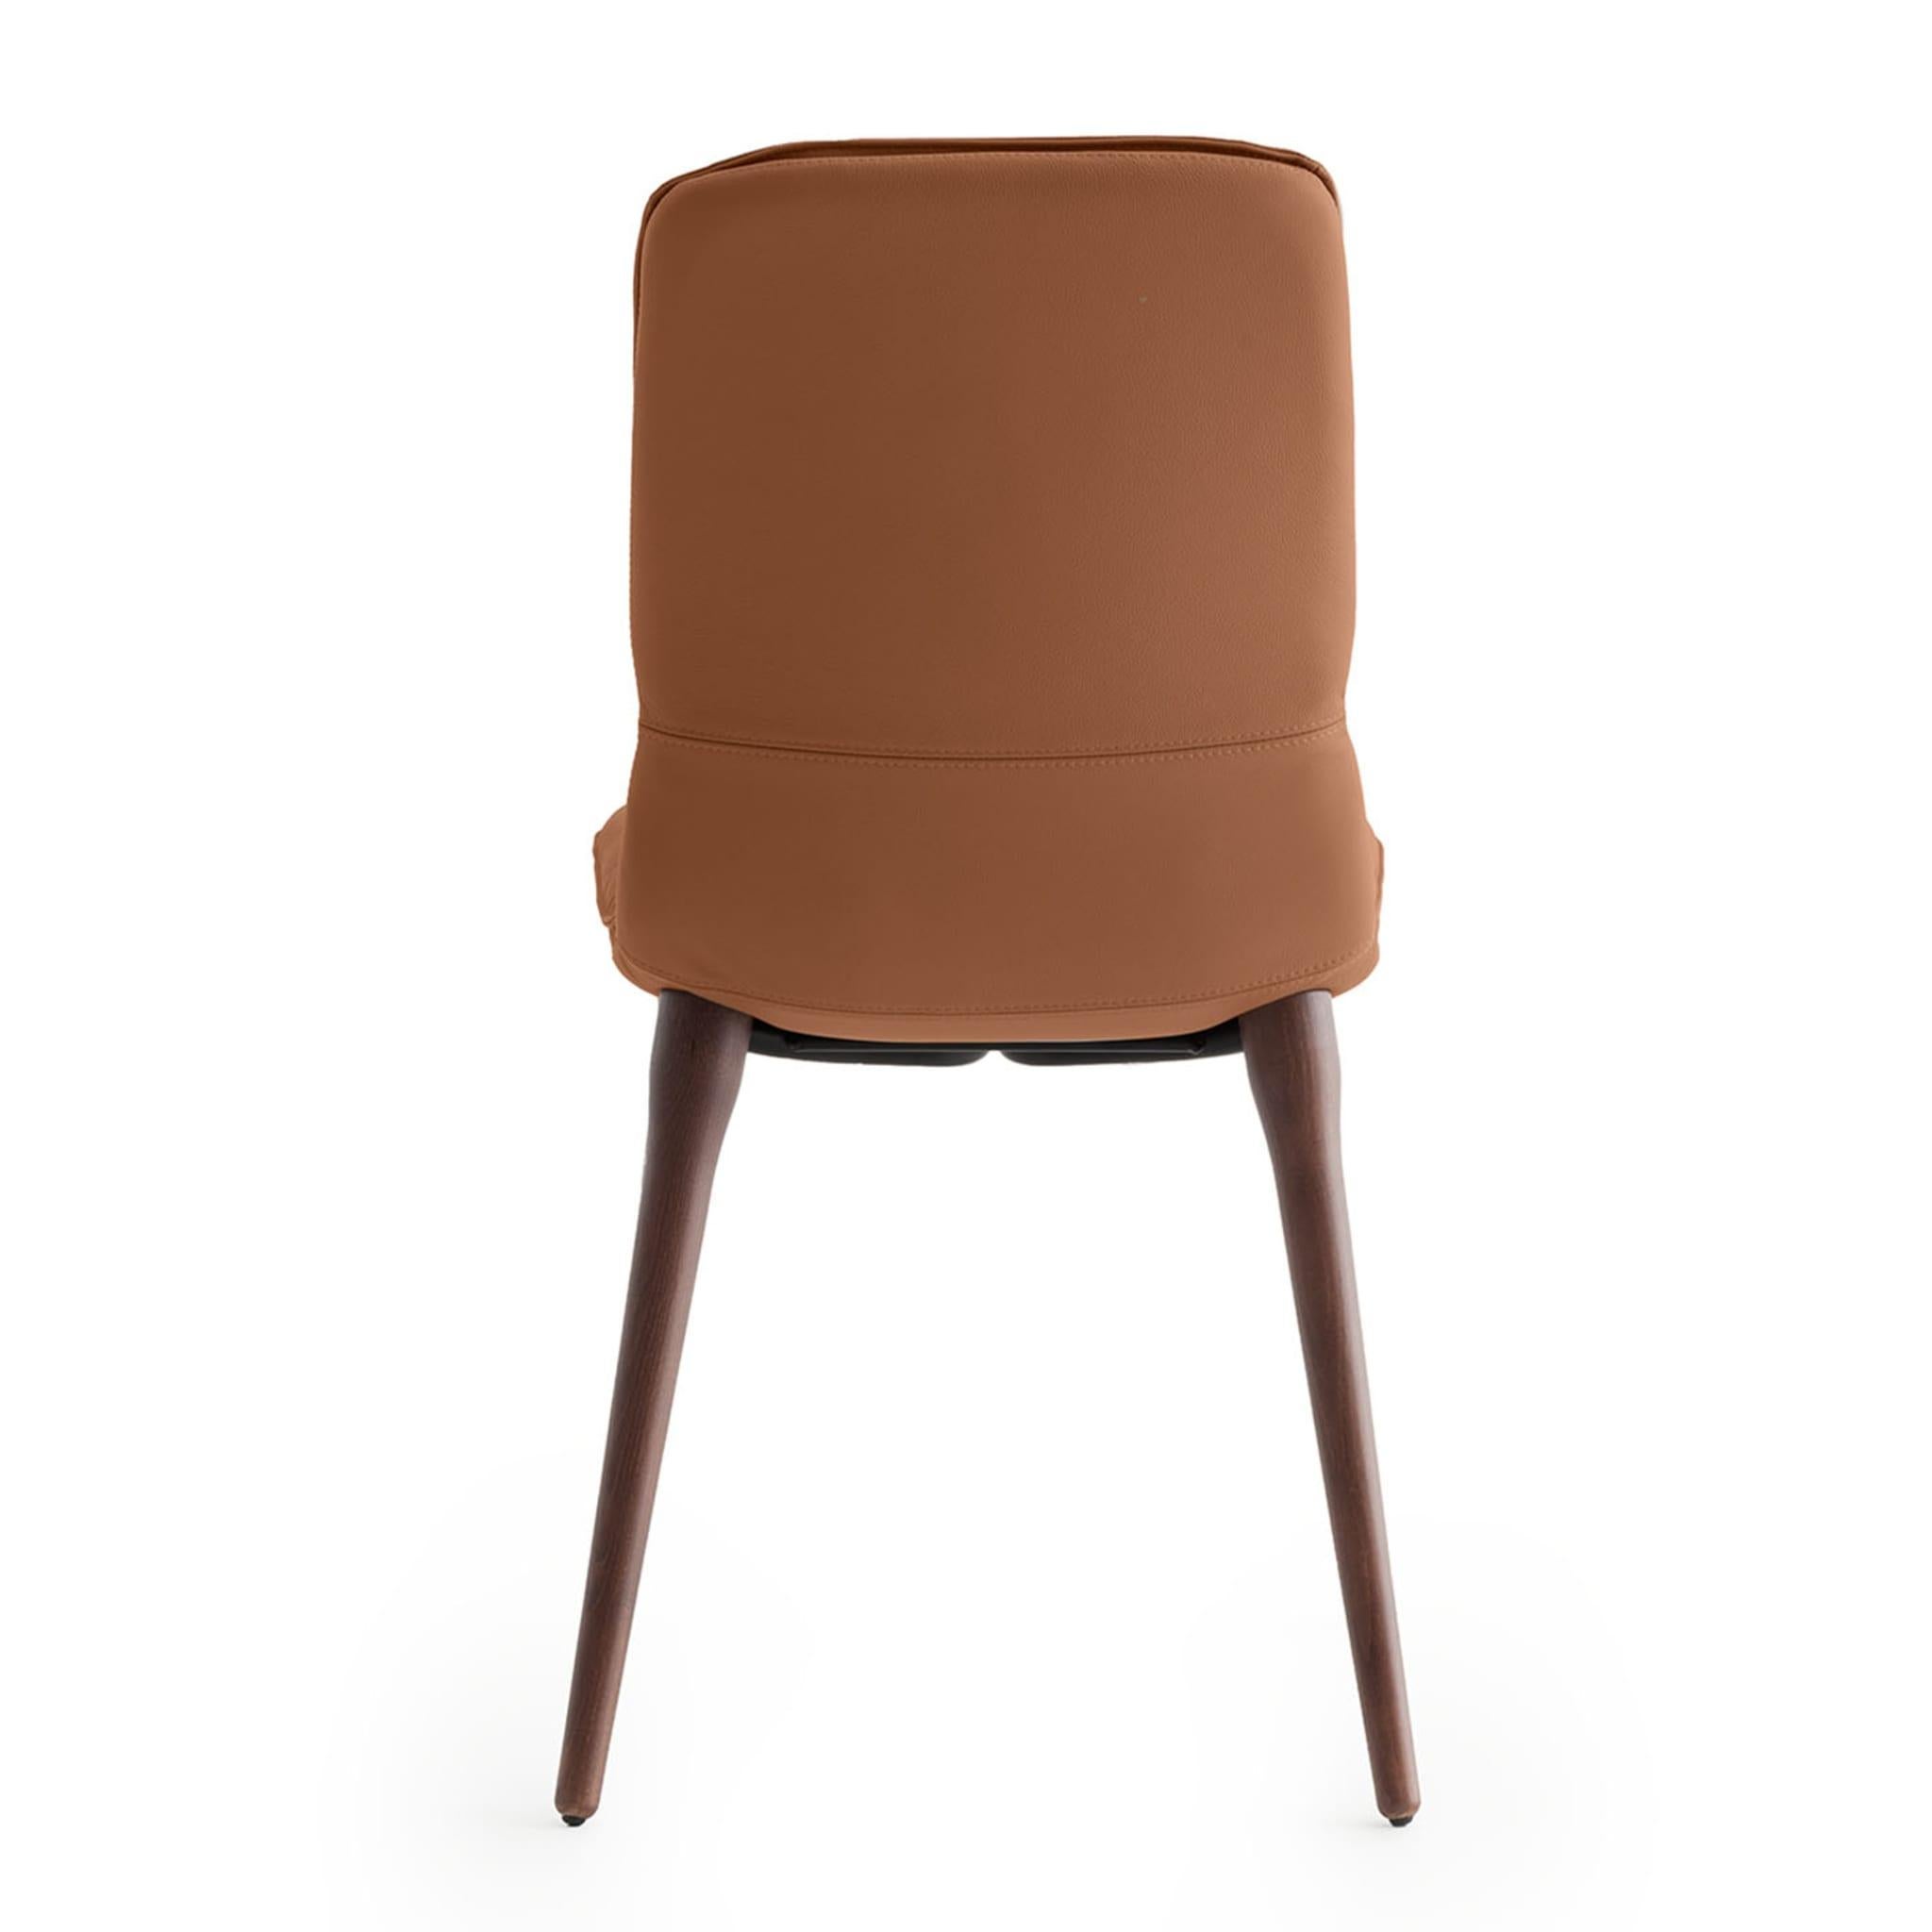 Contemporary Coco Cognac-Toned Leather Chair For Sale